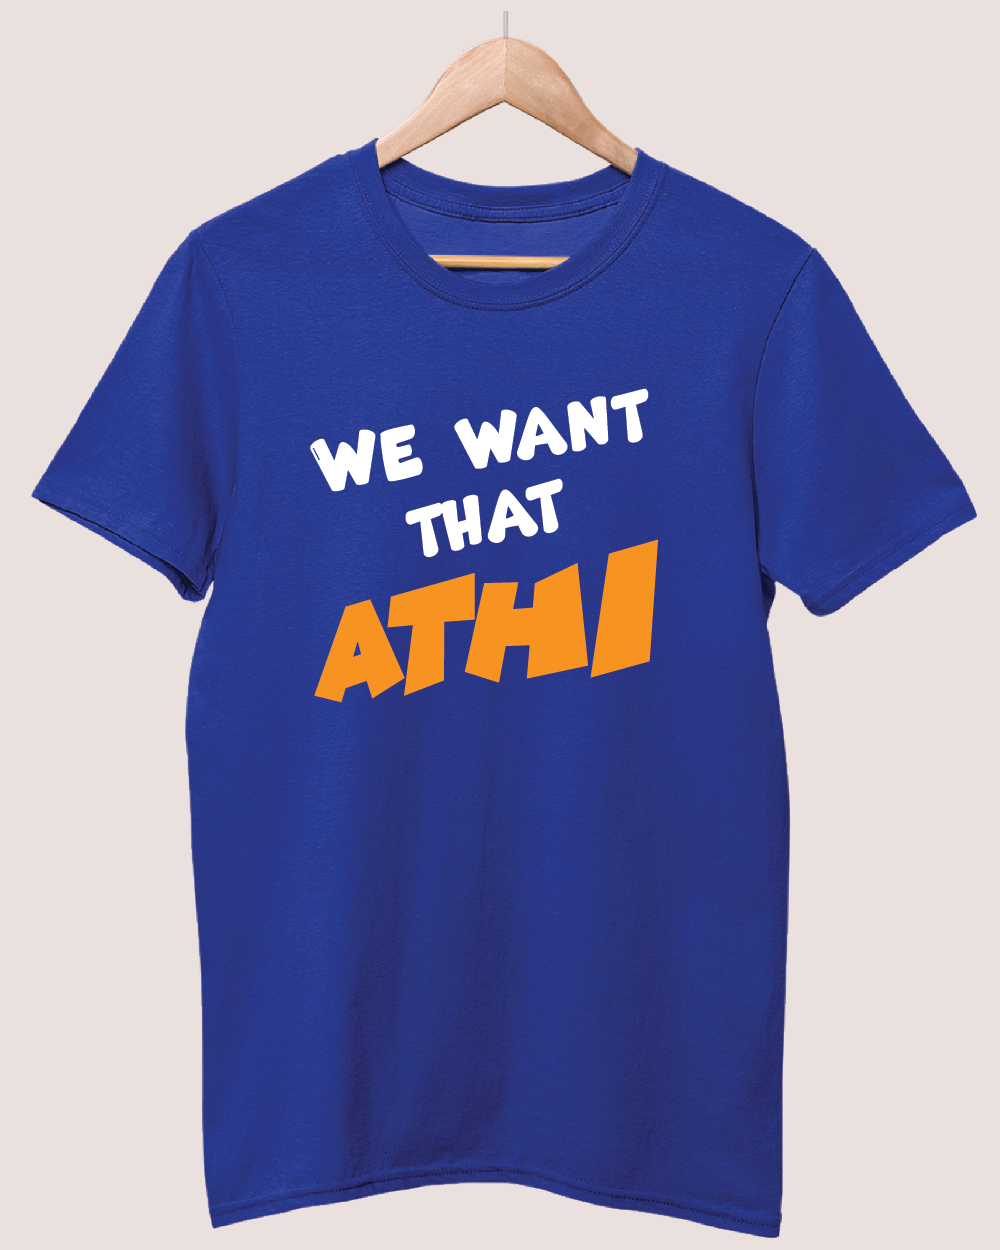 We want that athi 1 T-shirt